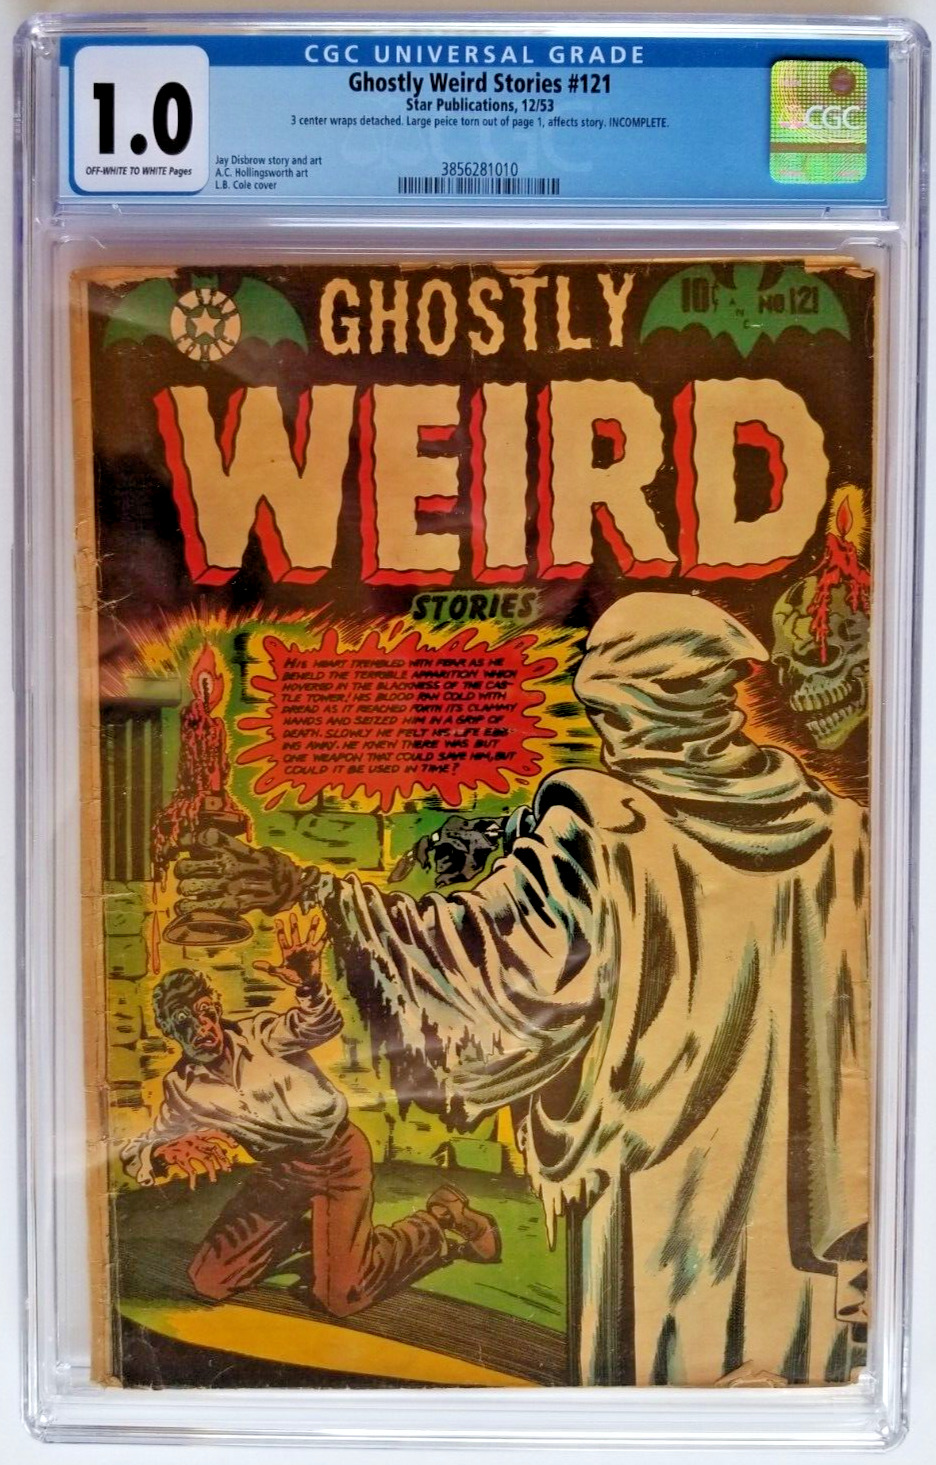 GHOSTLY WEIRD STORIES #121 CGC FR 1.0 STAR 1953 L.B.COLE COVER HOLLINGSWORTH ART